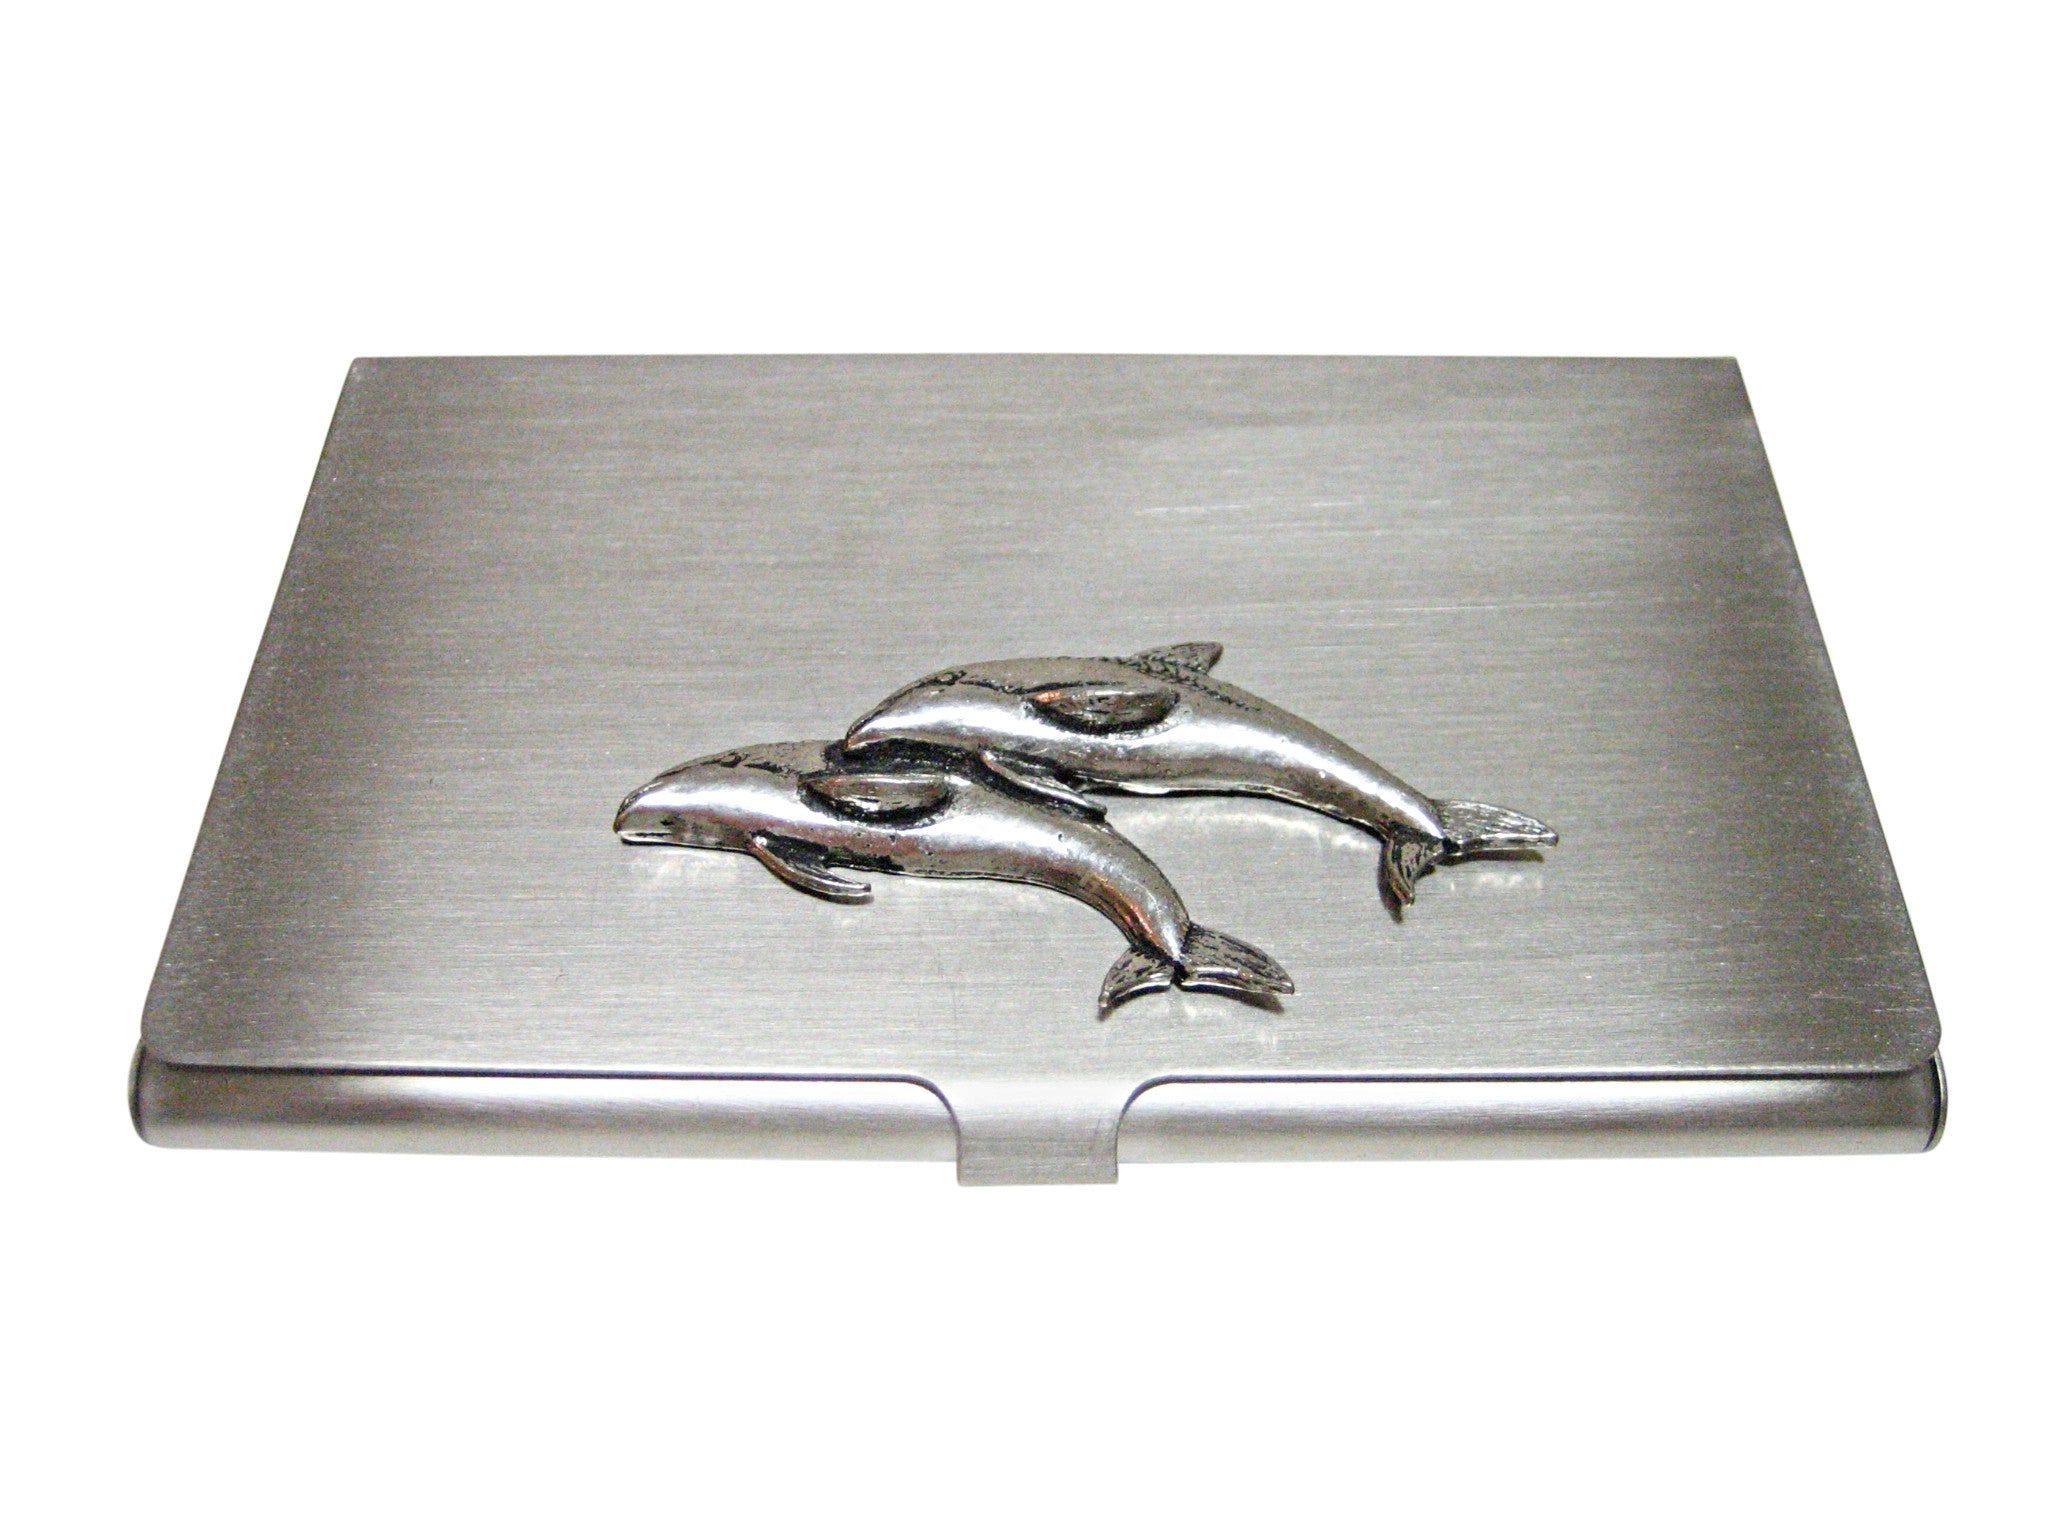 Pair of Dolphins Business Card Holder